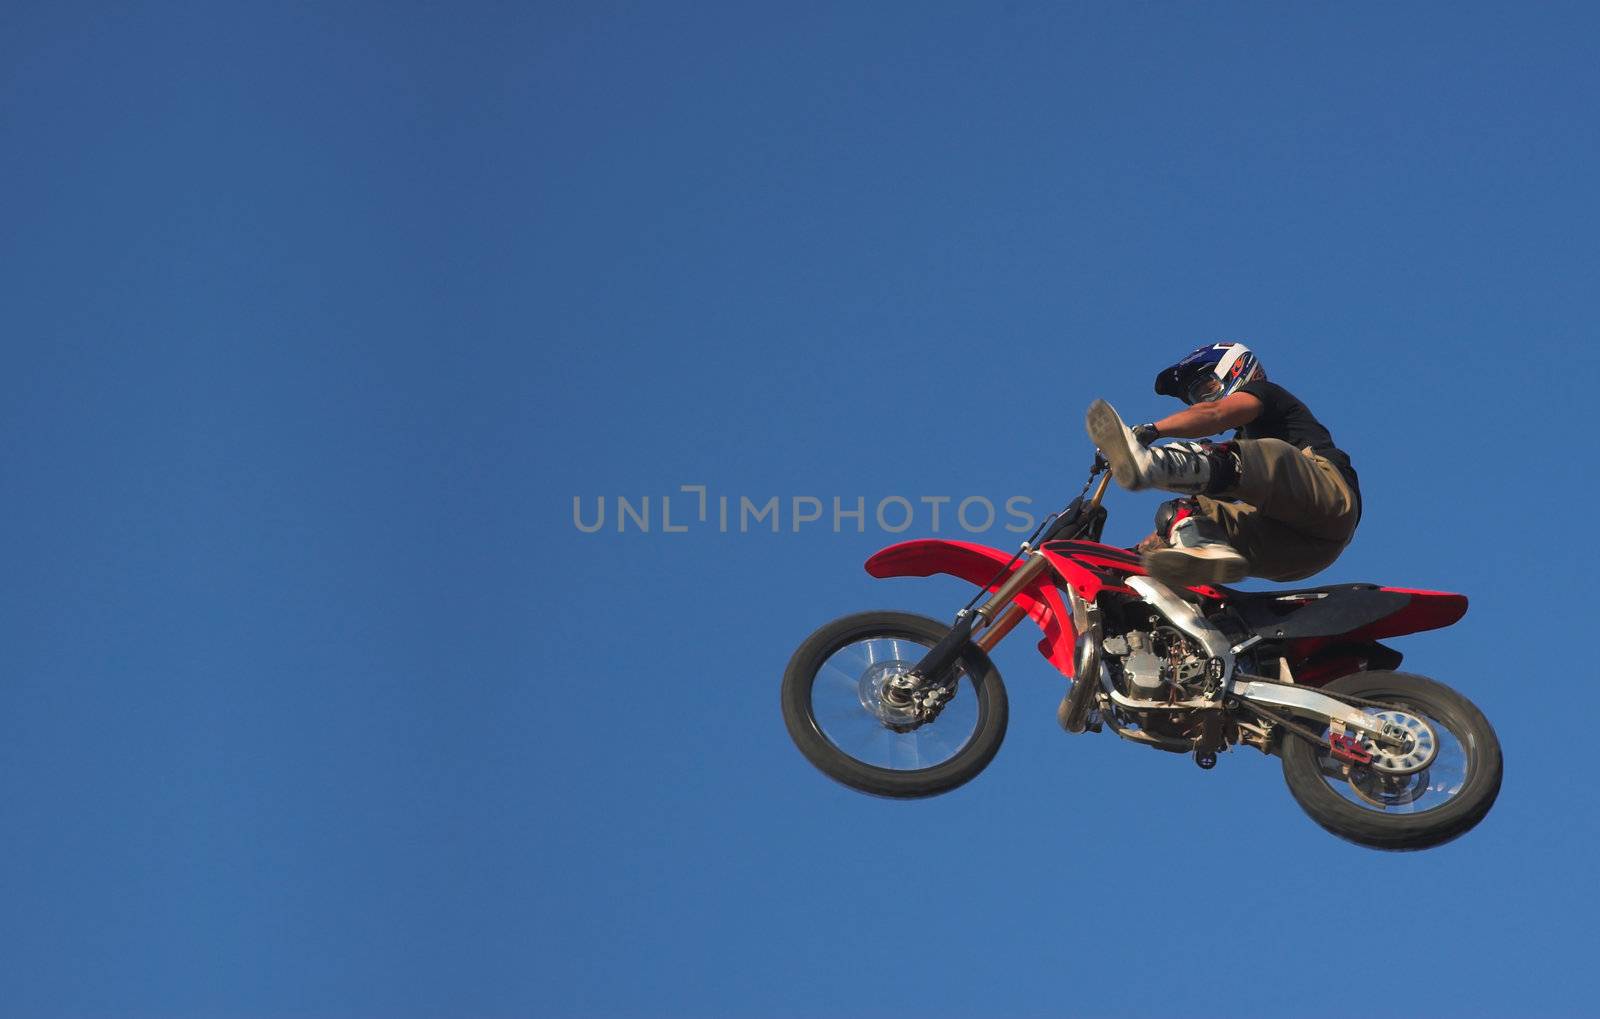 Moto X Freestyle rider jumps high in sky